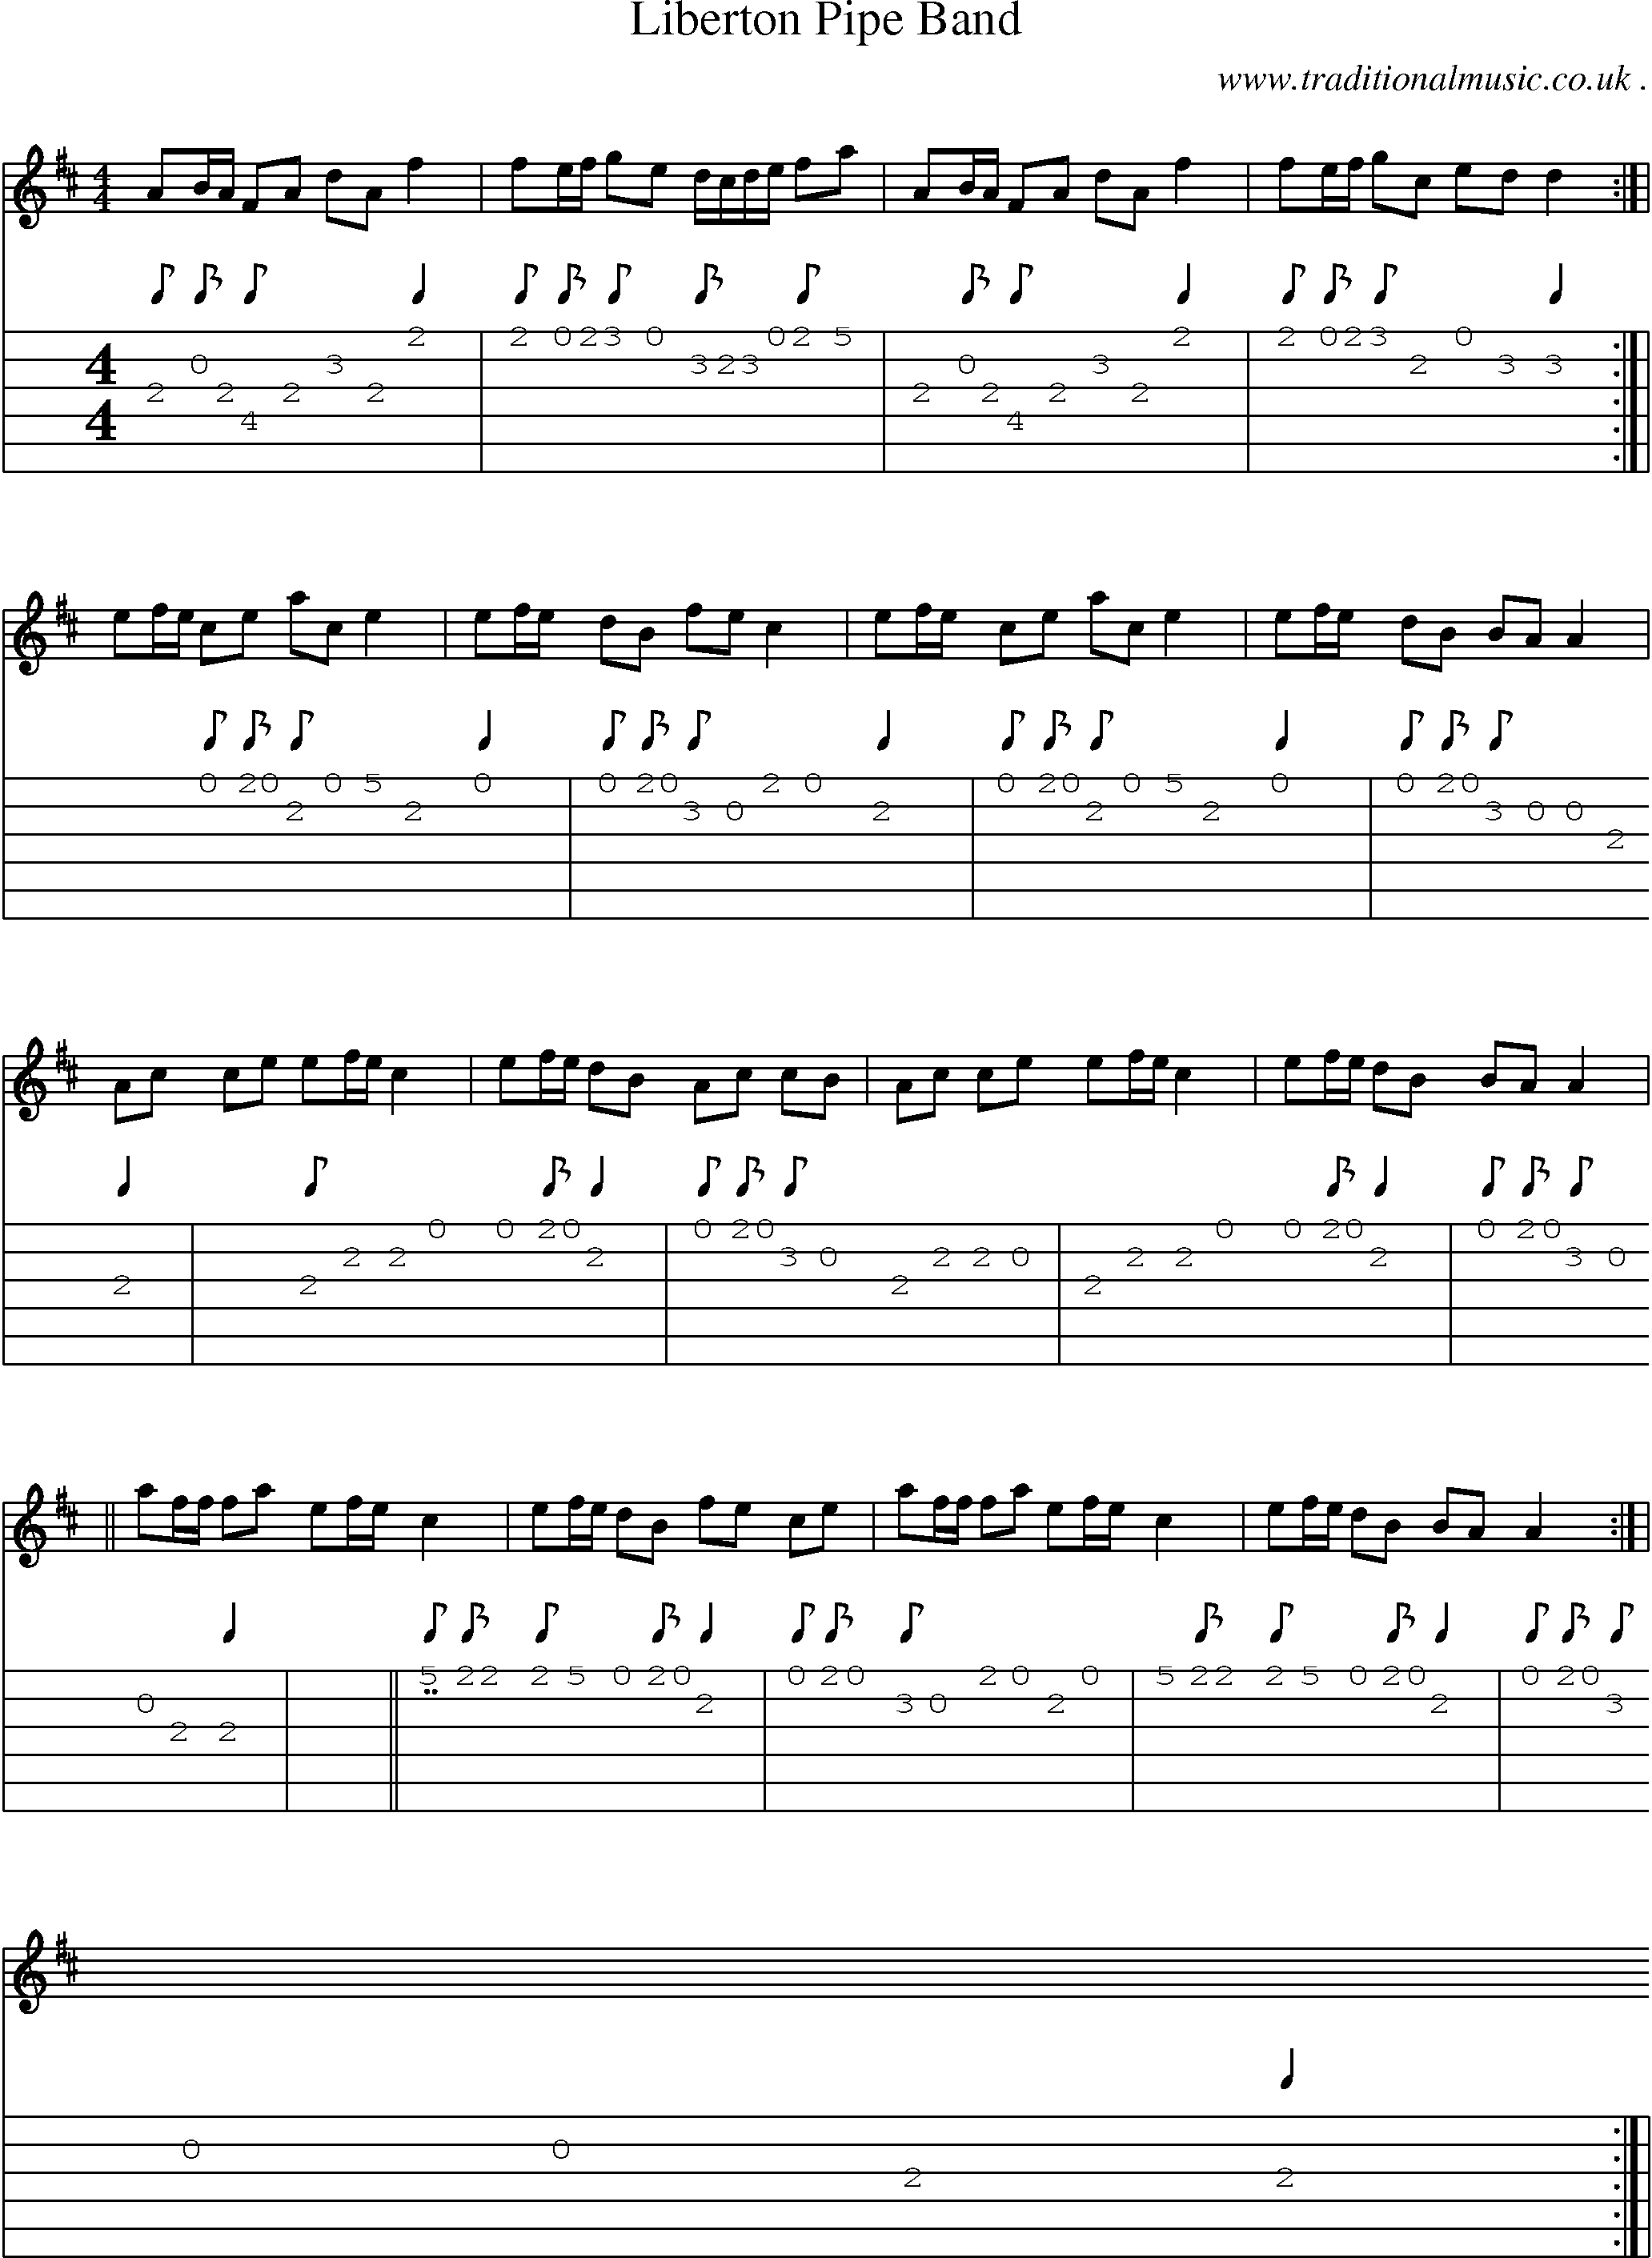 Sheet-music  score, Chords and Guitar Tabs for Liberton Pipe Band